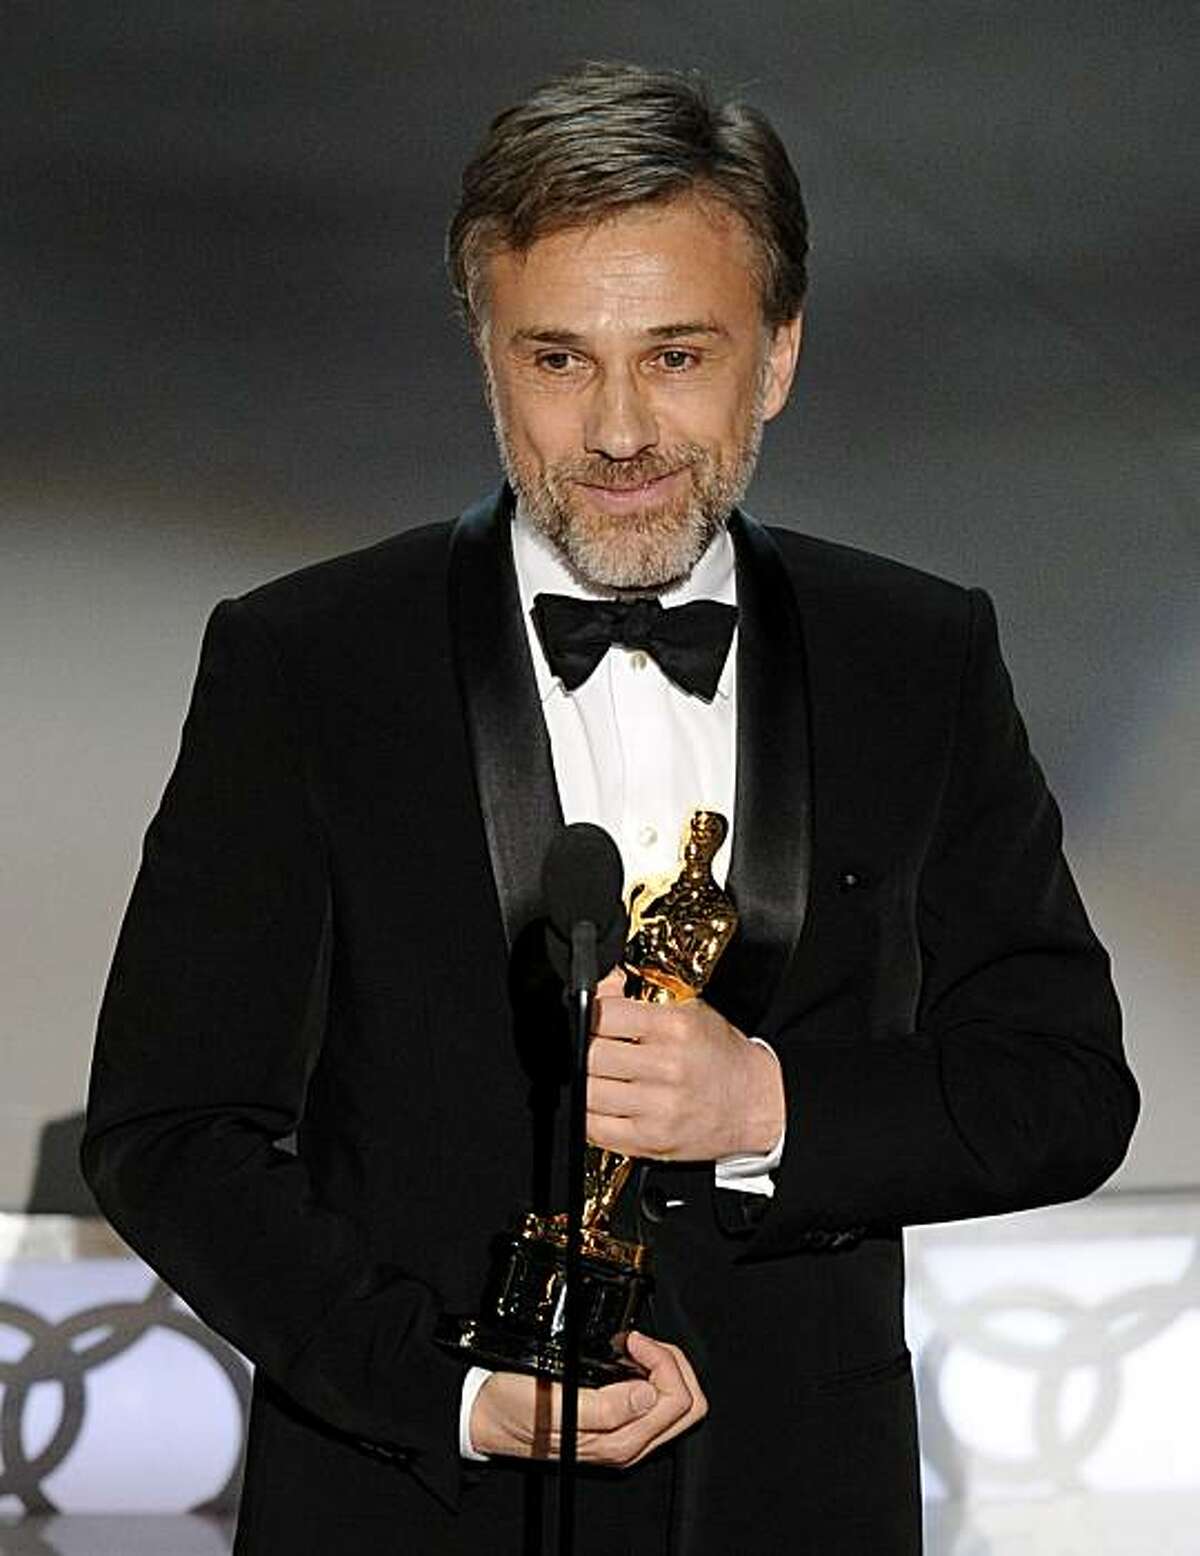 Christoph Waltz accepts the Oscar for best performance by an actor in a supporting role for ?Inglourious Basterds? at the 82nd Academy Awards Sunday, March 7, 2010, in the Hollywood section of Los Angeles.